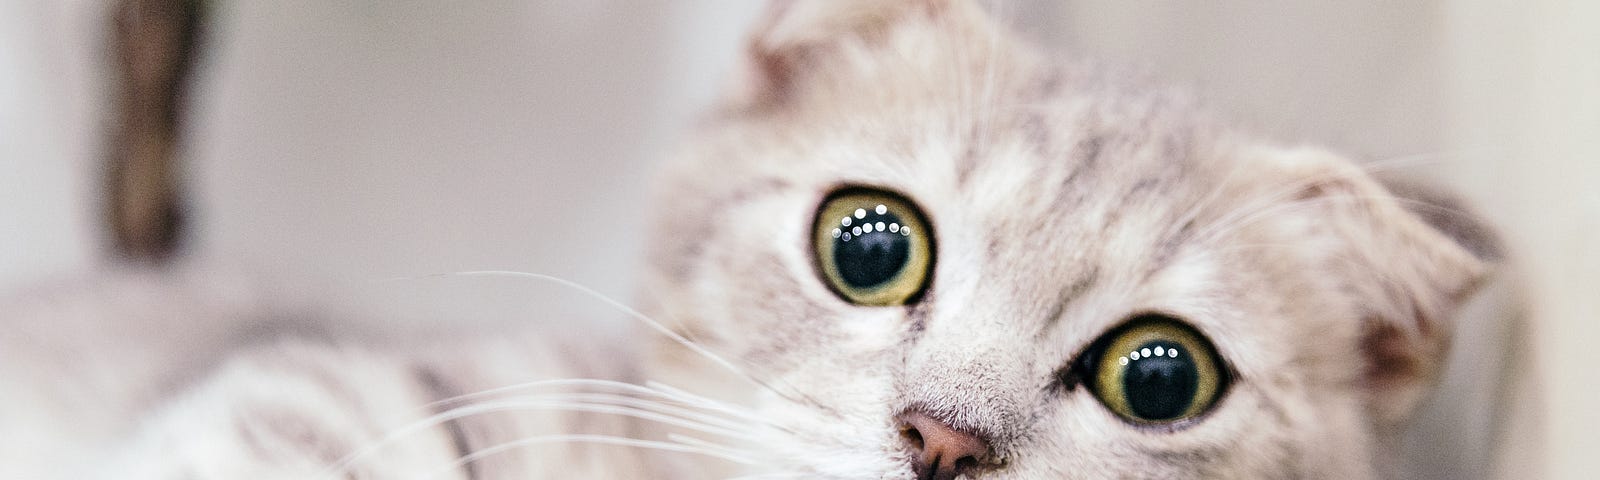 A little white cat with big green eyes is looking up anxiously